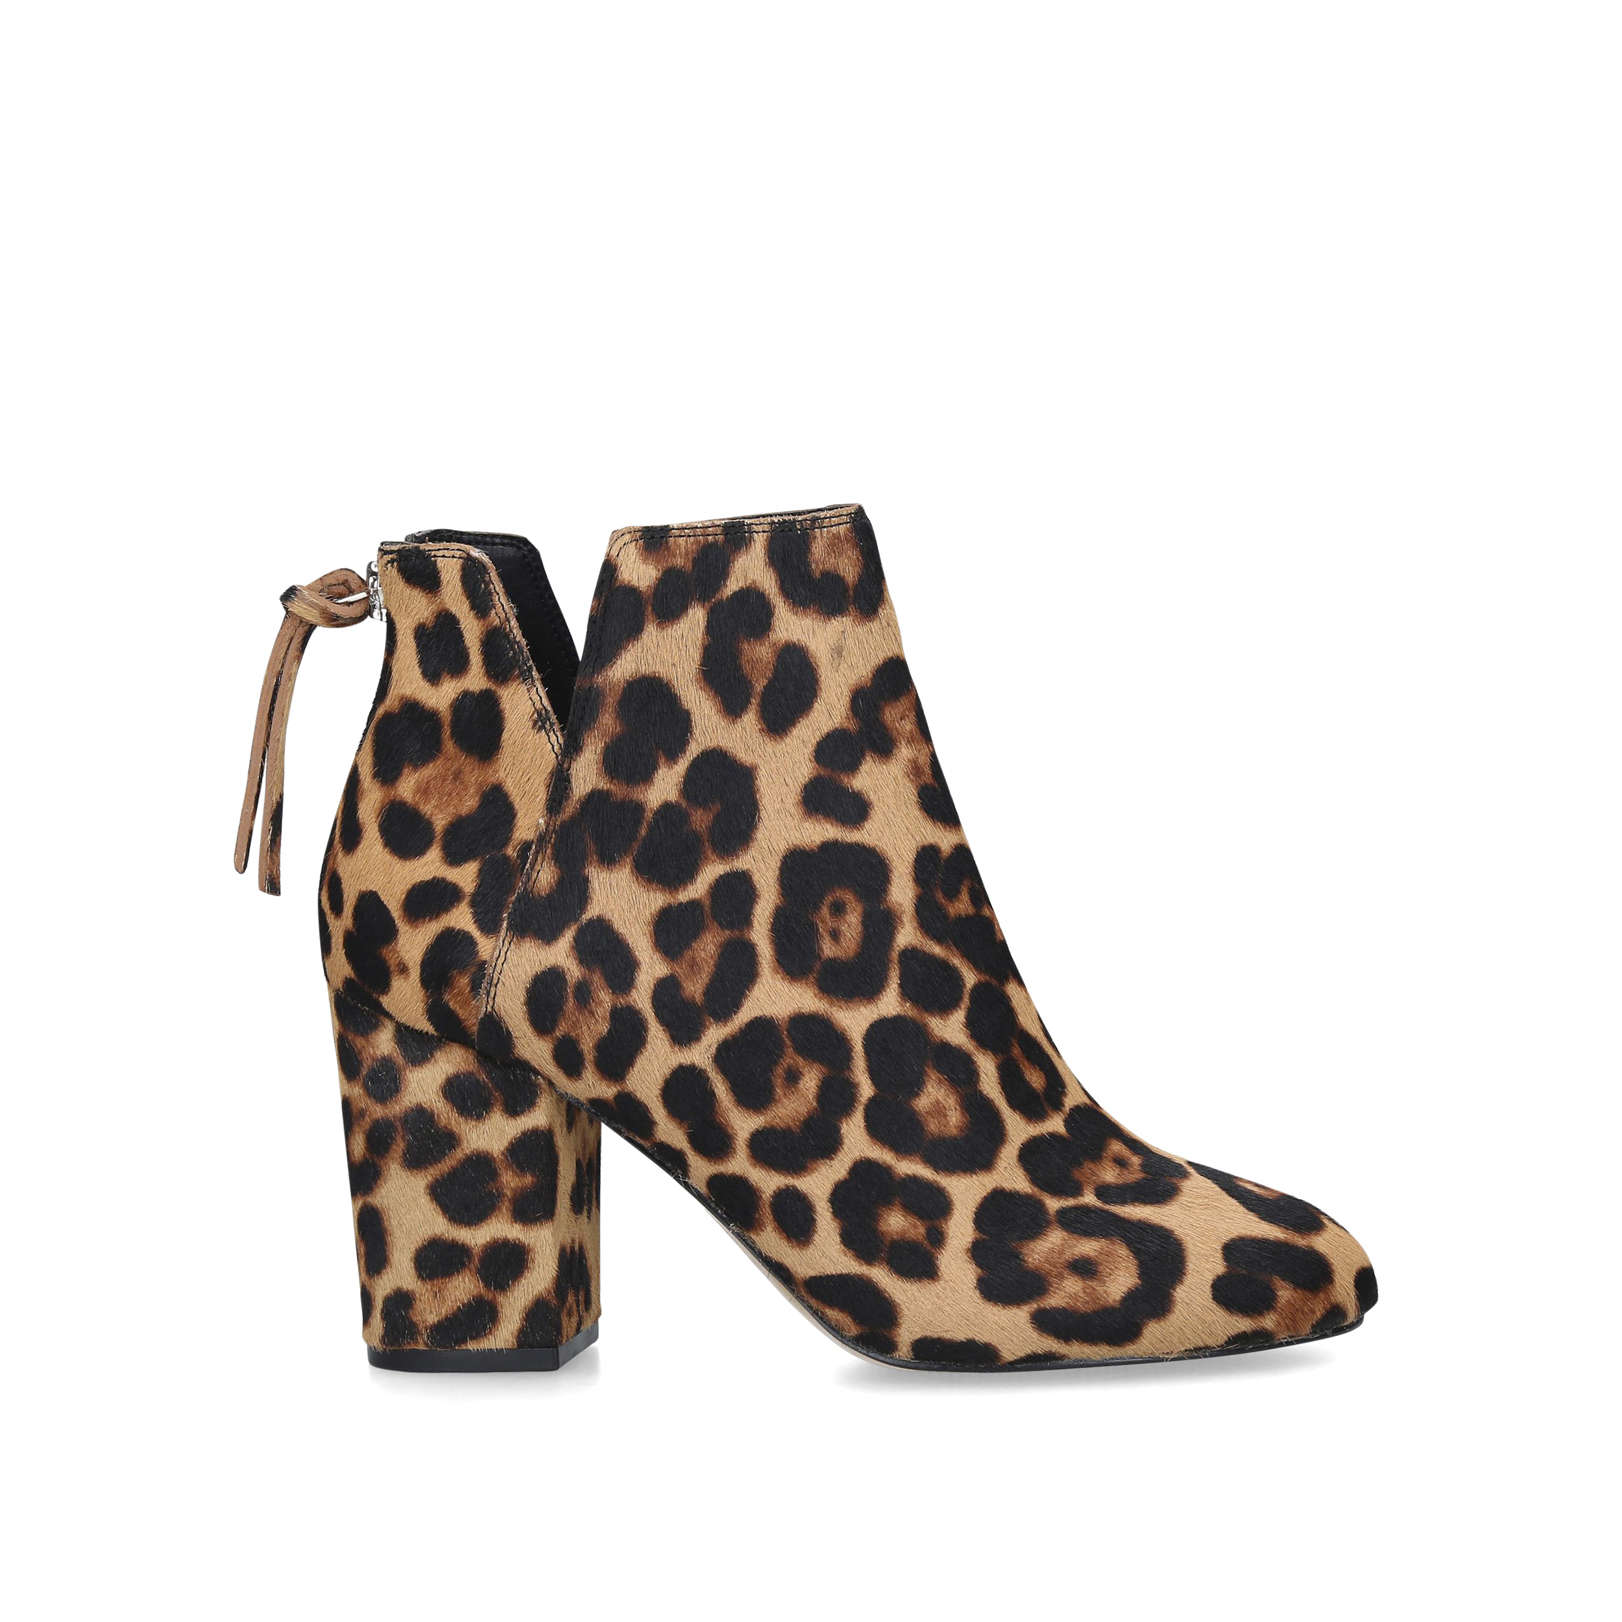 DOMINICAA - ALDO Ankle Boots